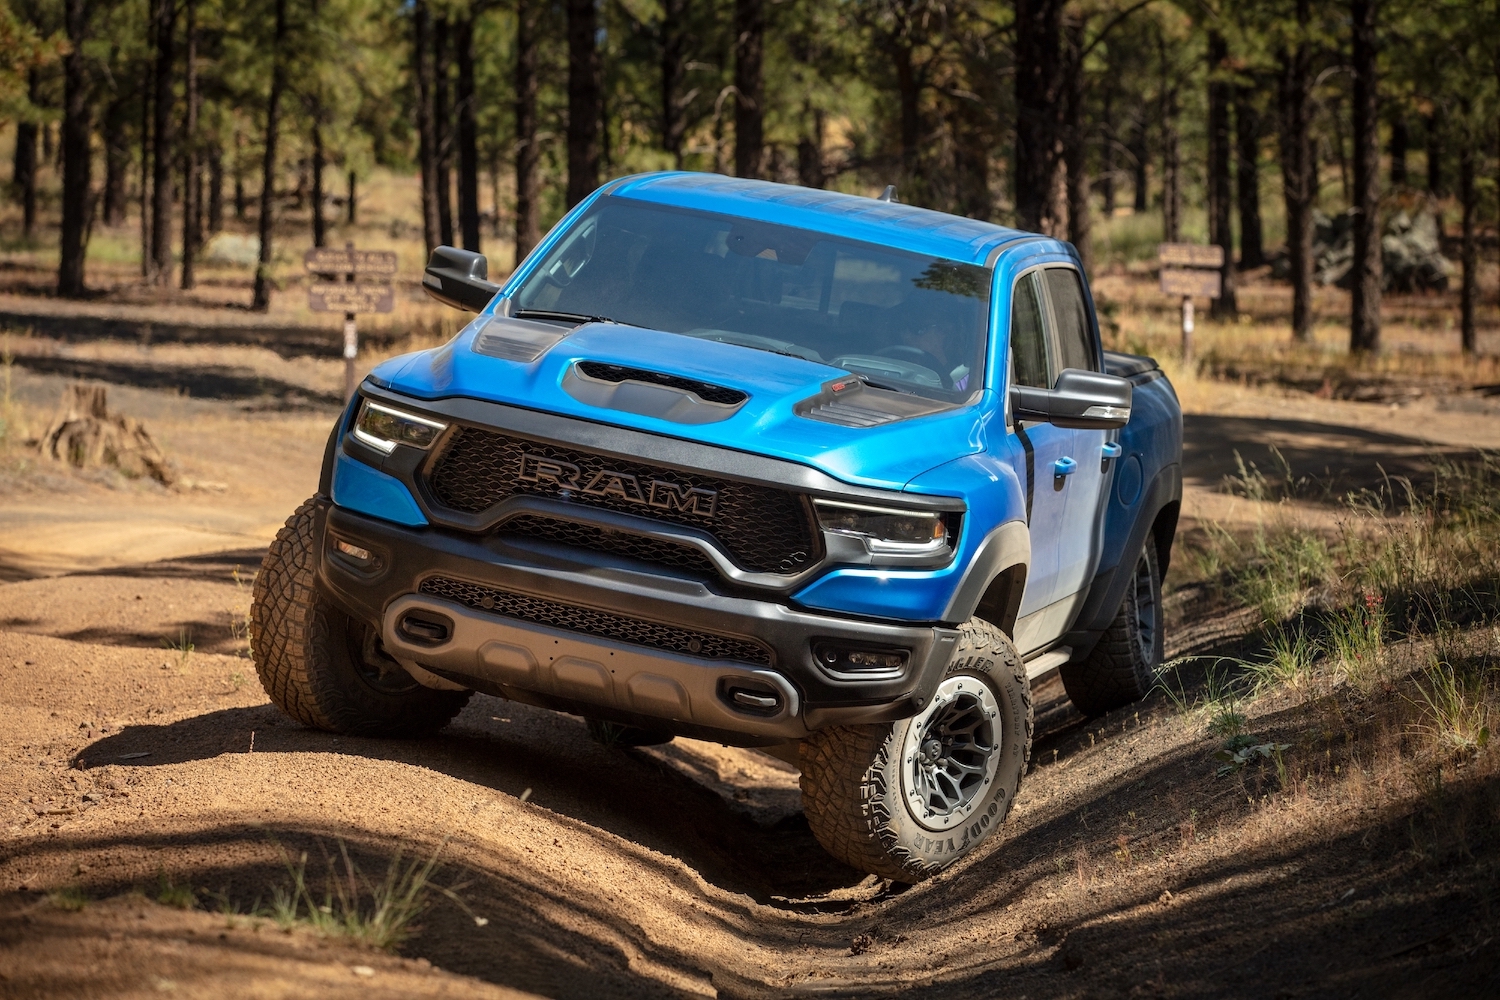 Promo photo of the supercharged Ram 1500 TRX super truck parked on a 4x4 trail, a row of trees in the background.